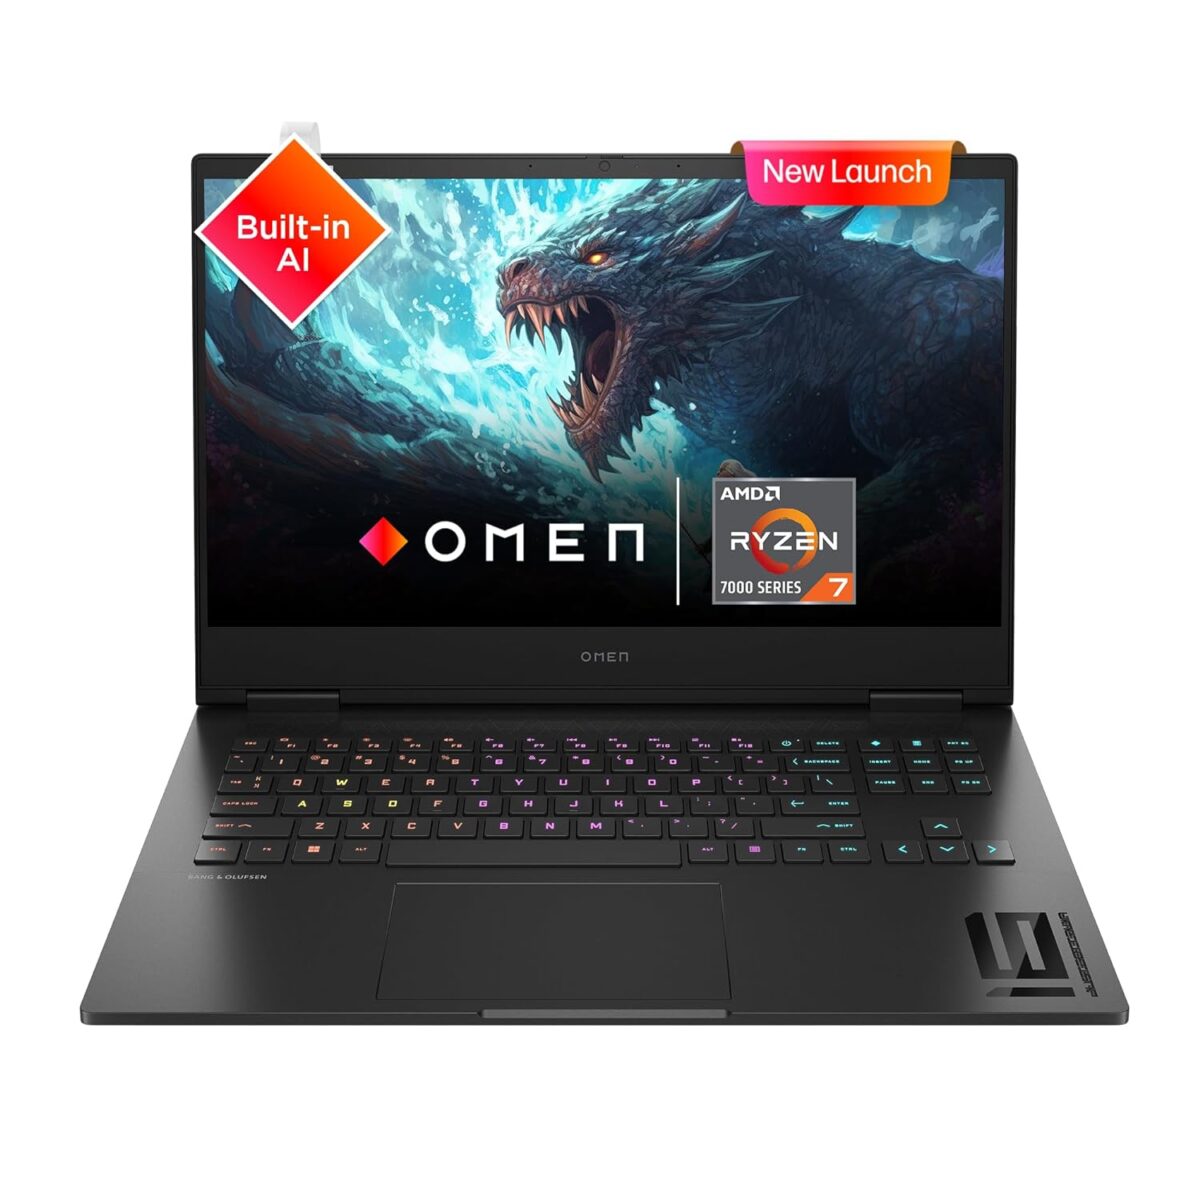 HP OMEN 16-xd0017AX A11RTPA laptop: Powered by AMD Ryzen 7 7840HS and RTX 4060 Graphics launched in India